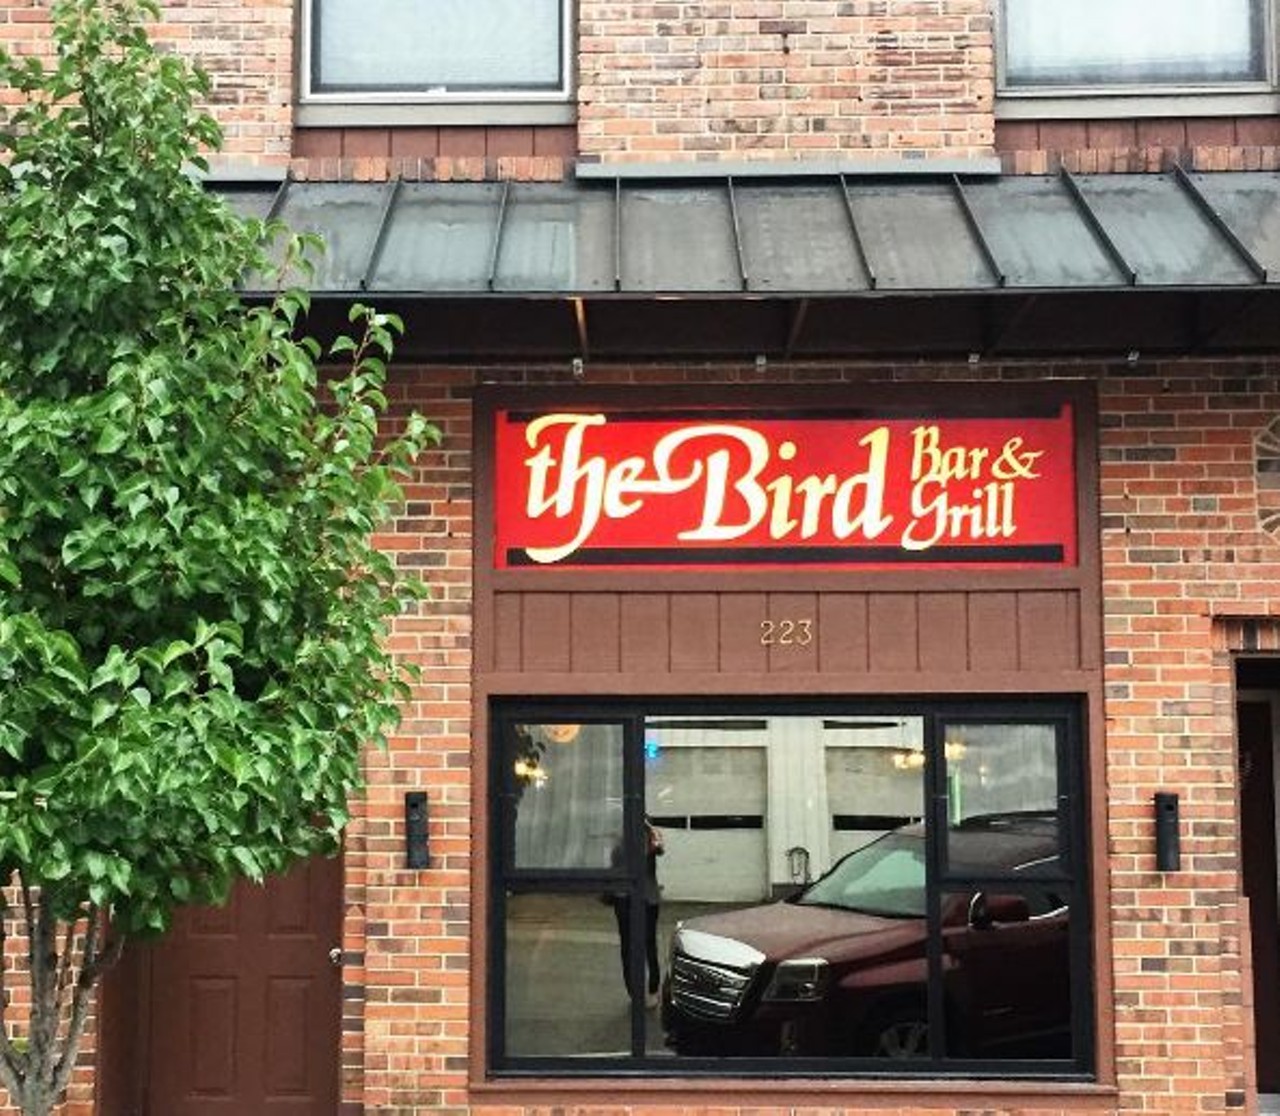 The Bird 
Central Michigan University
Not only is this the place to be for a night out, but they also serve some great bar food. Get here early, enjoy a meal then stay for the night because it will fill up quick.